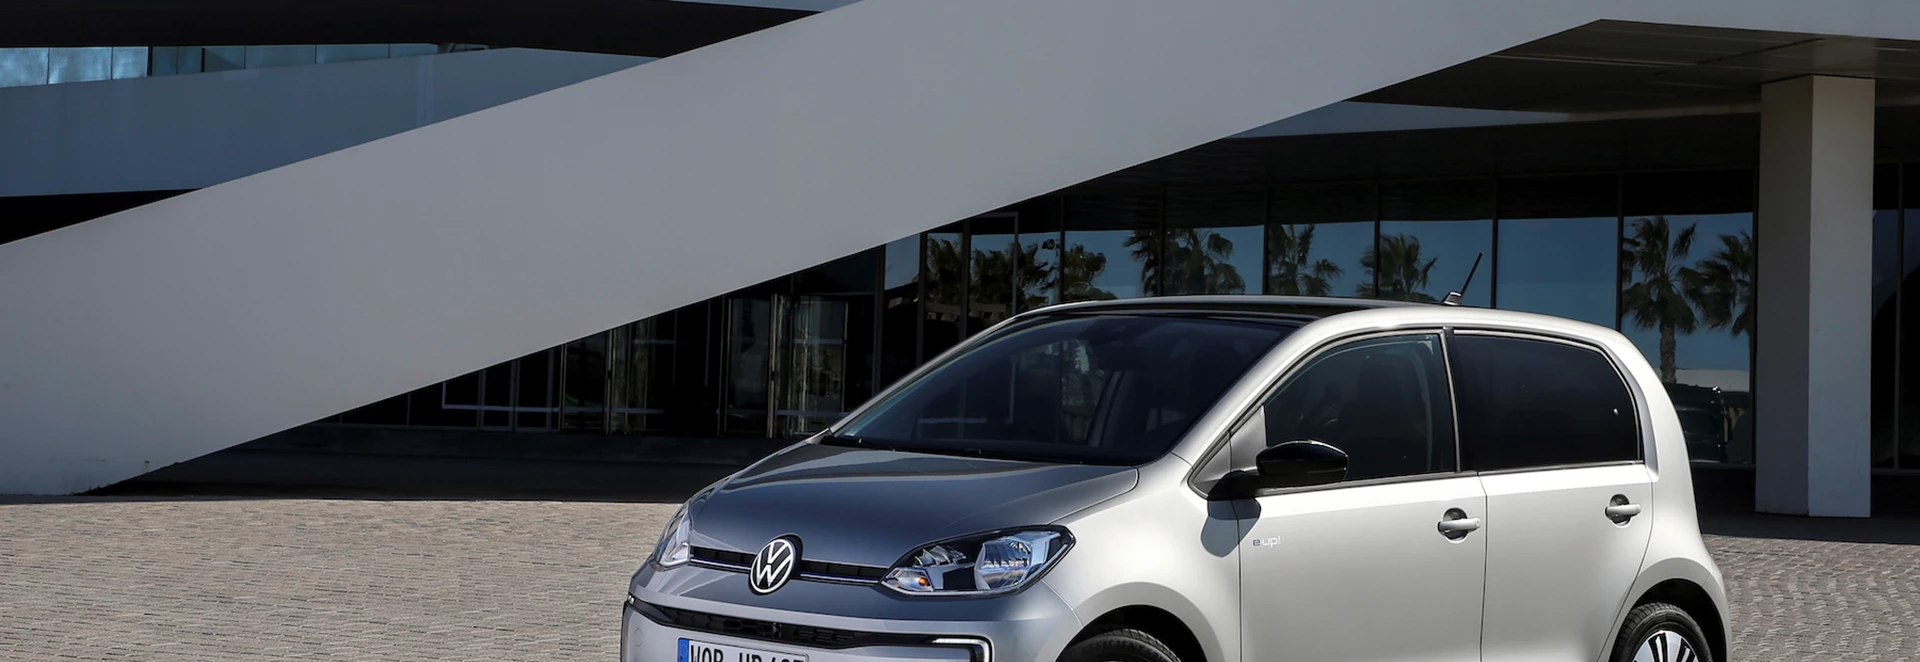 Prices and specs for updated Volkswagen e-Up! electric car announced